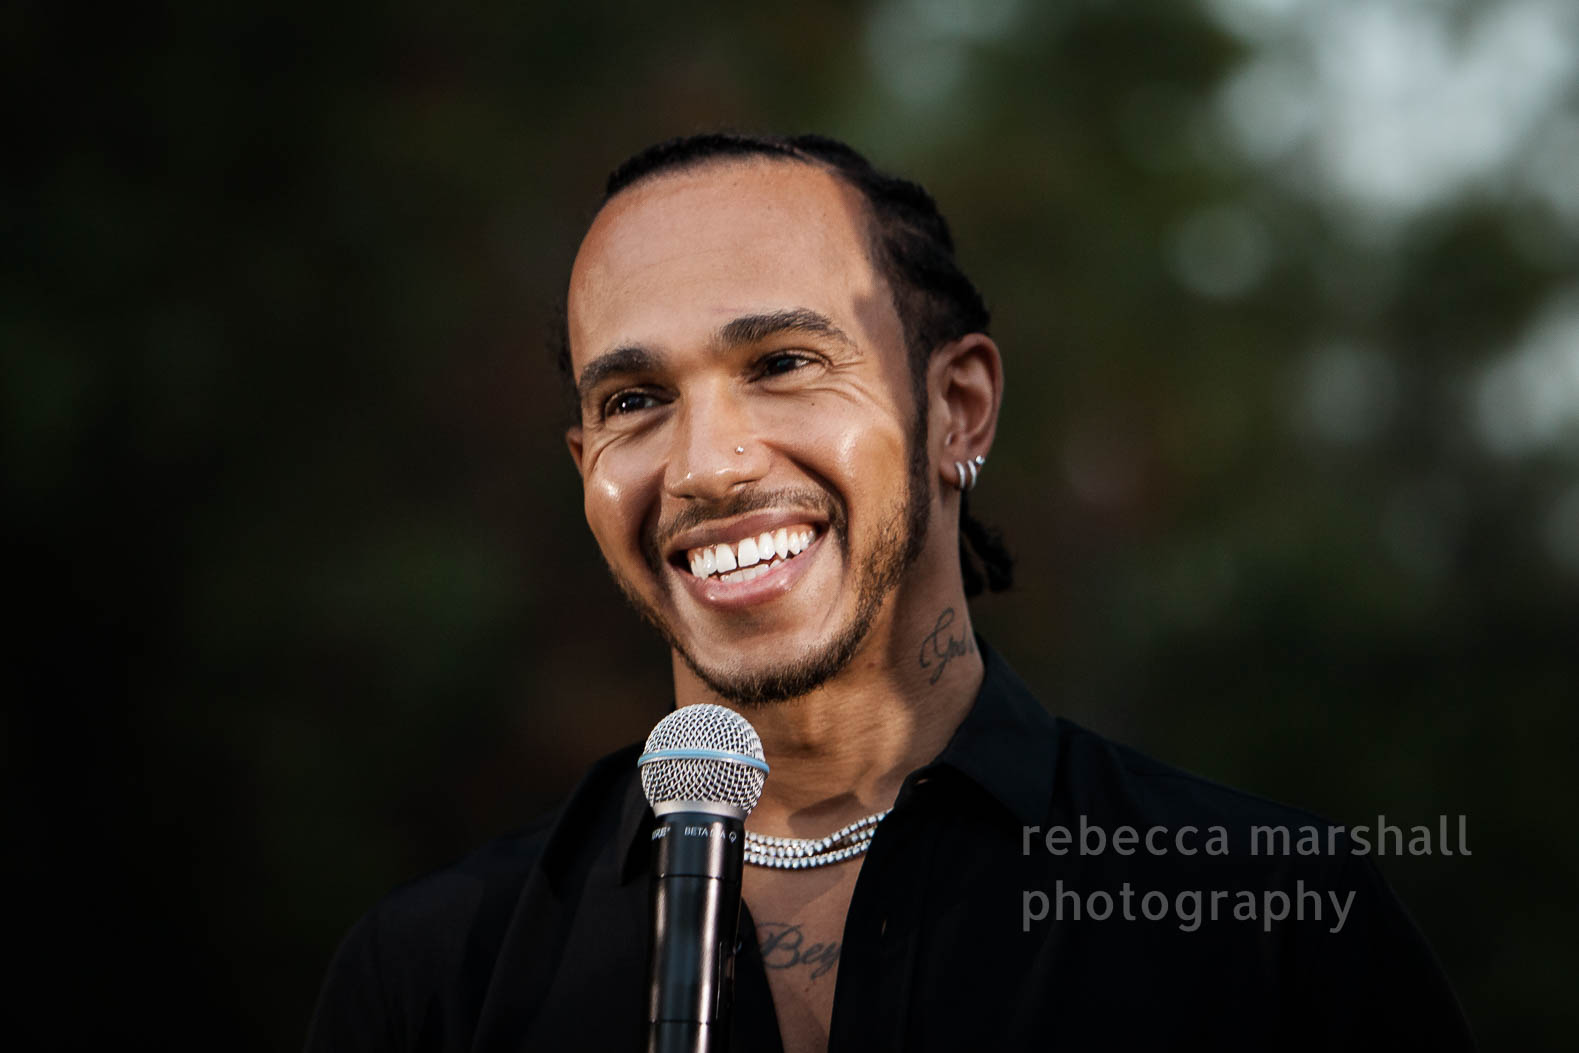 Photograph of Lewis Hamilton speaking into a microphone